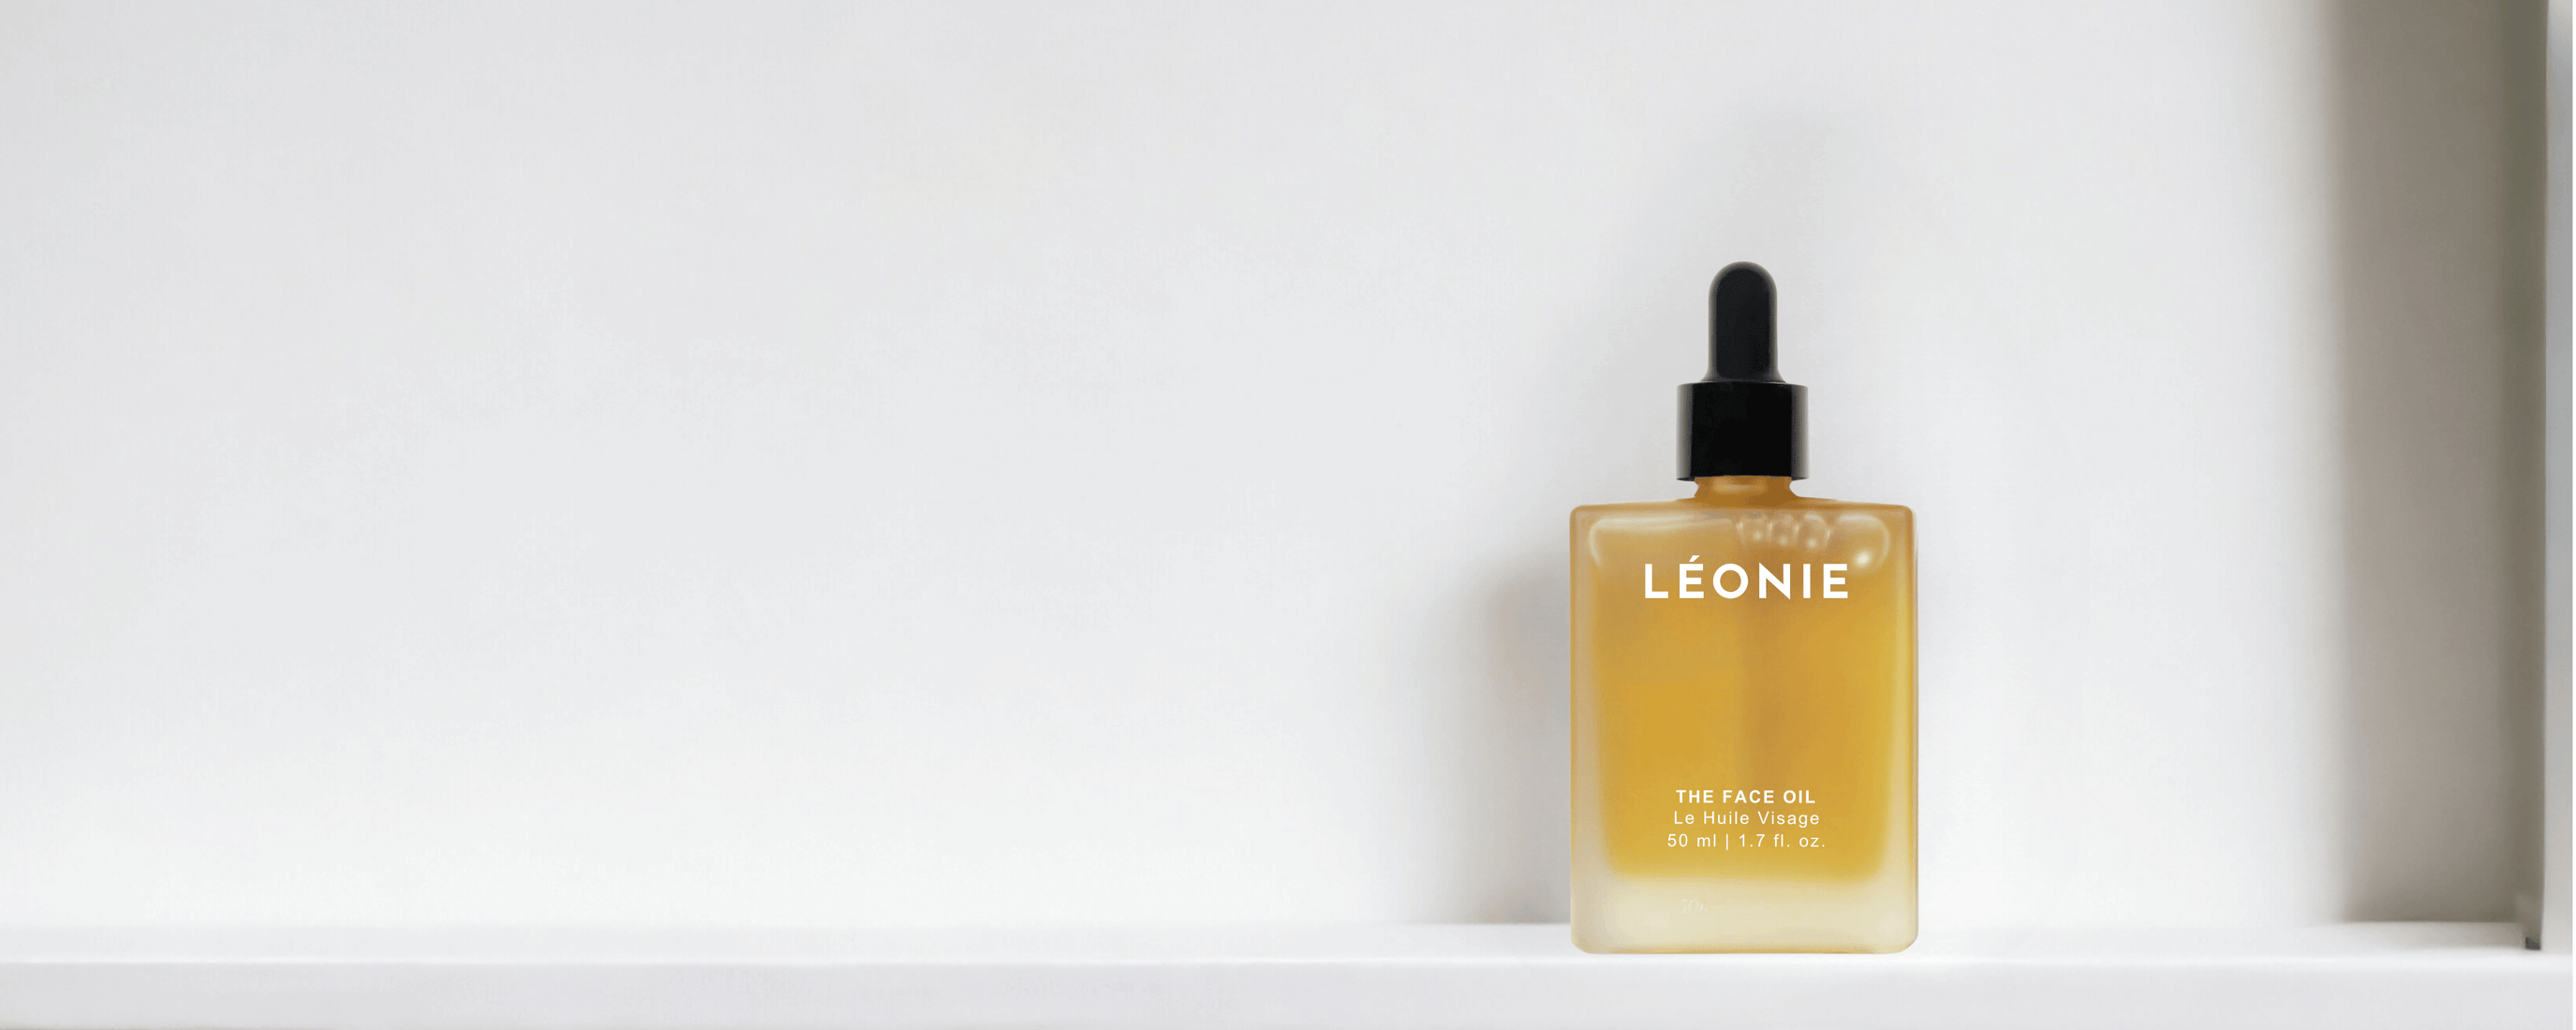 BANNER OF LEONIE THE FACE OIL